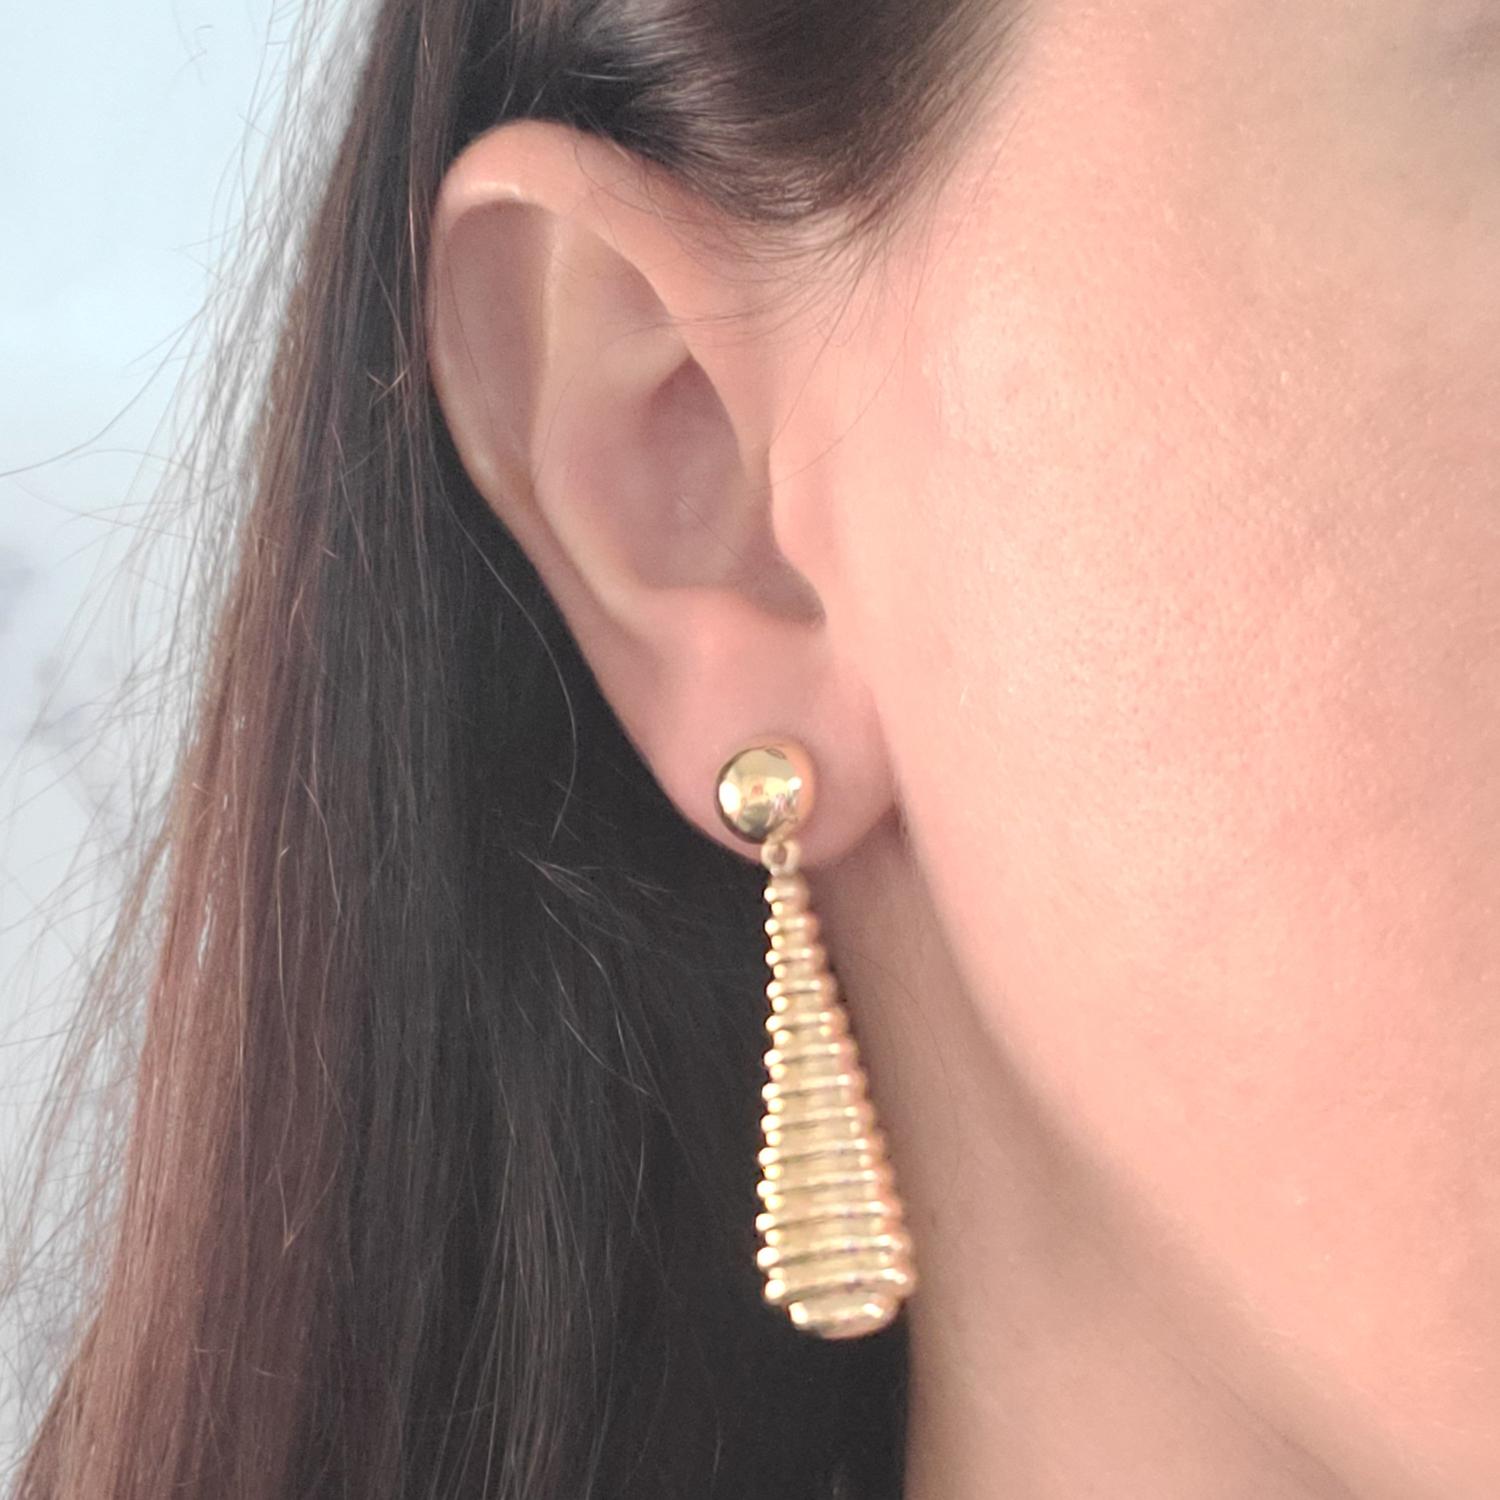 14 Karat Yellow Gold Drop Earrings Featuring Ridged Design. 2 Inches Long. Pierced Post With Friction Back. Finished Weight Is 2.5 Grams.